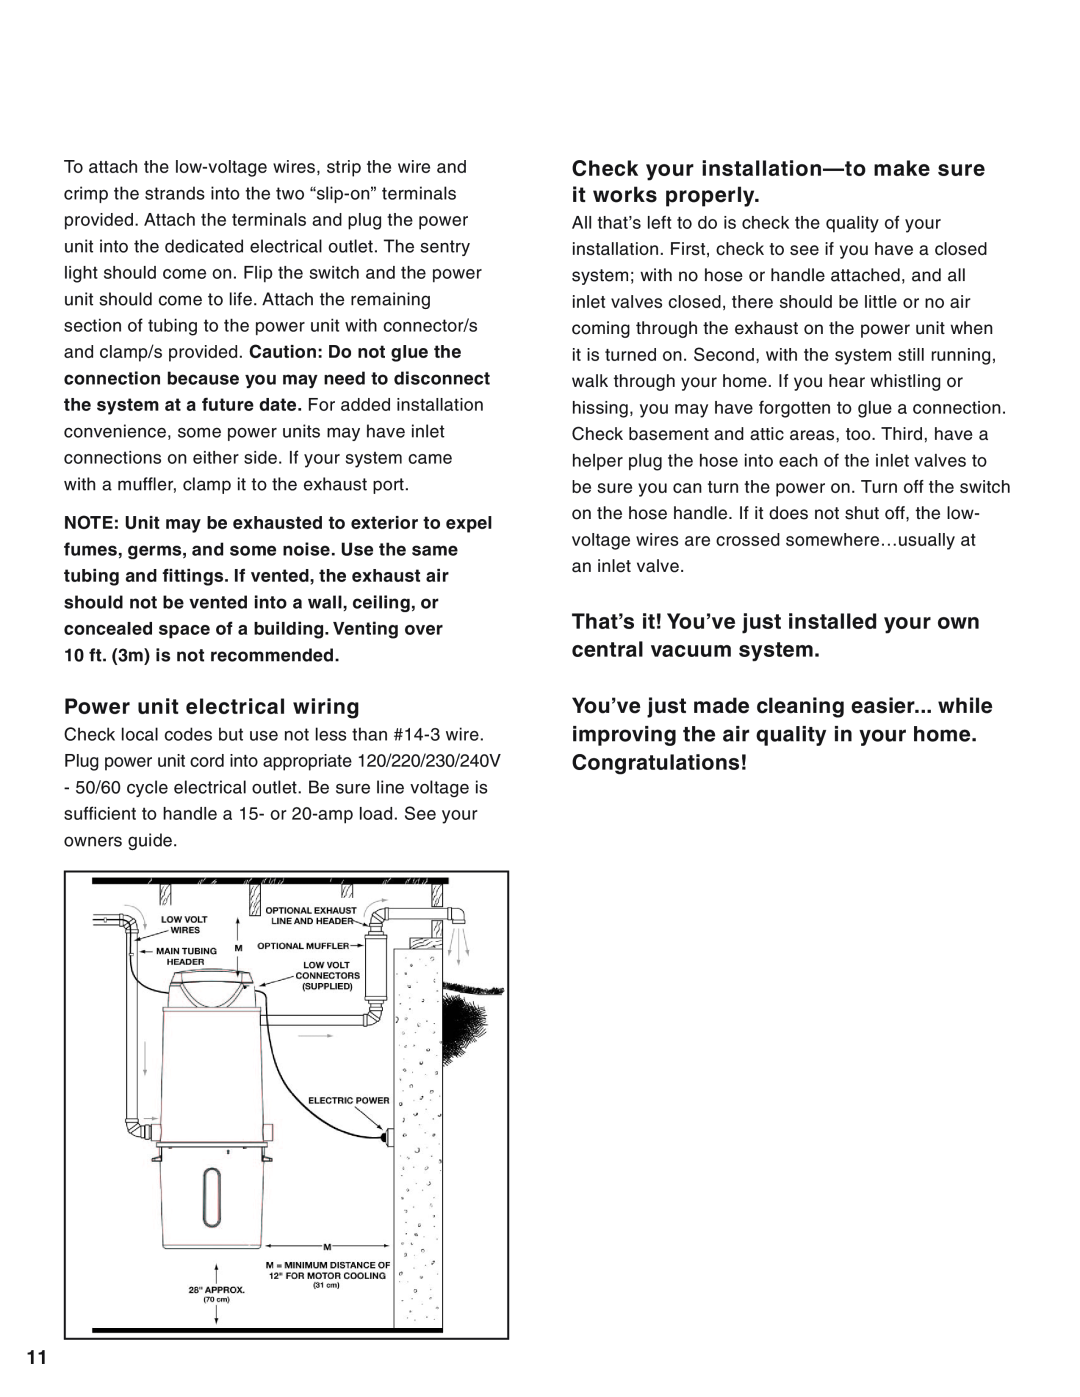 Eureka Central Vacuum Cleaner manual Power unit electrical wiring, Check your installation-to make sure it works properly 